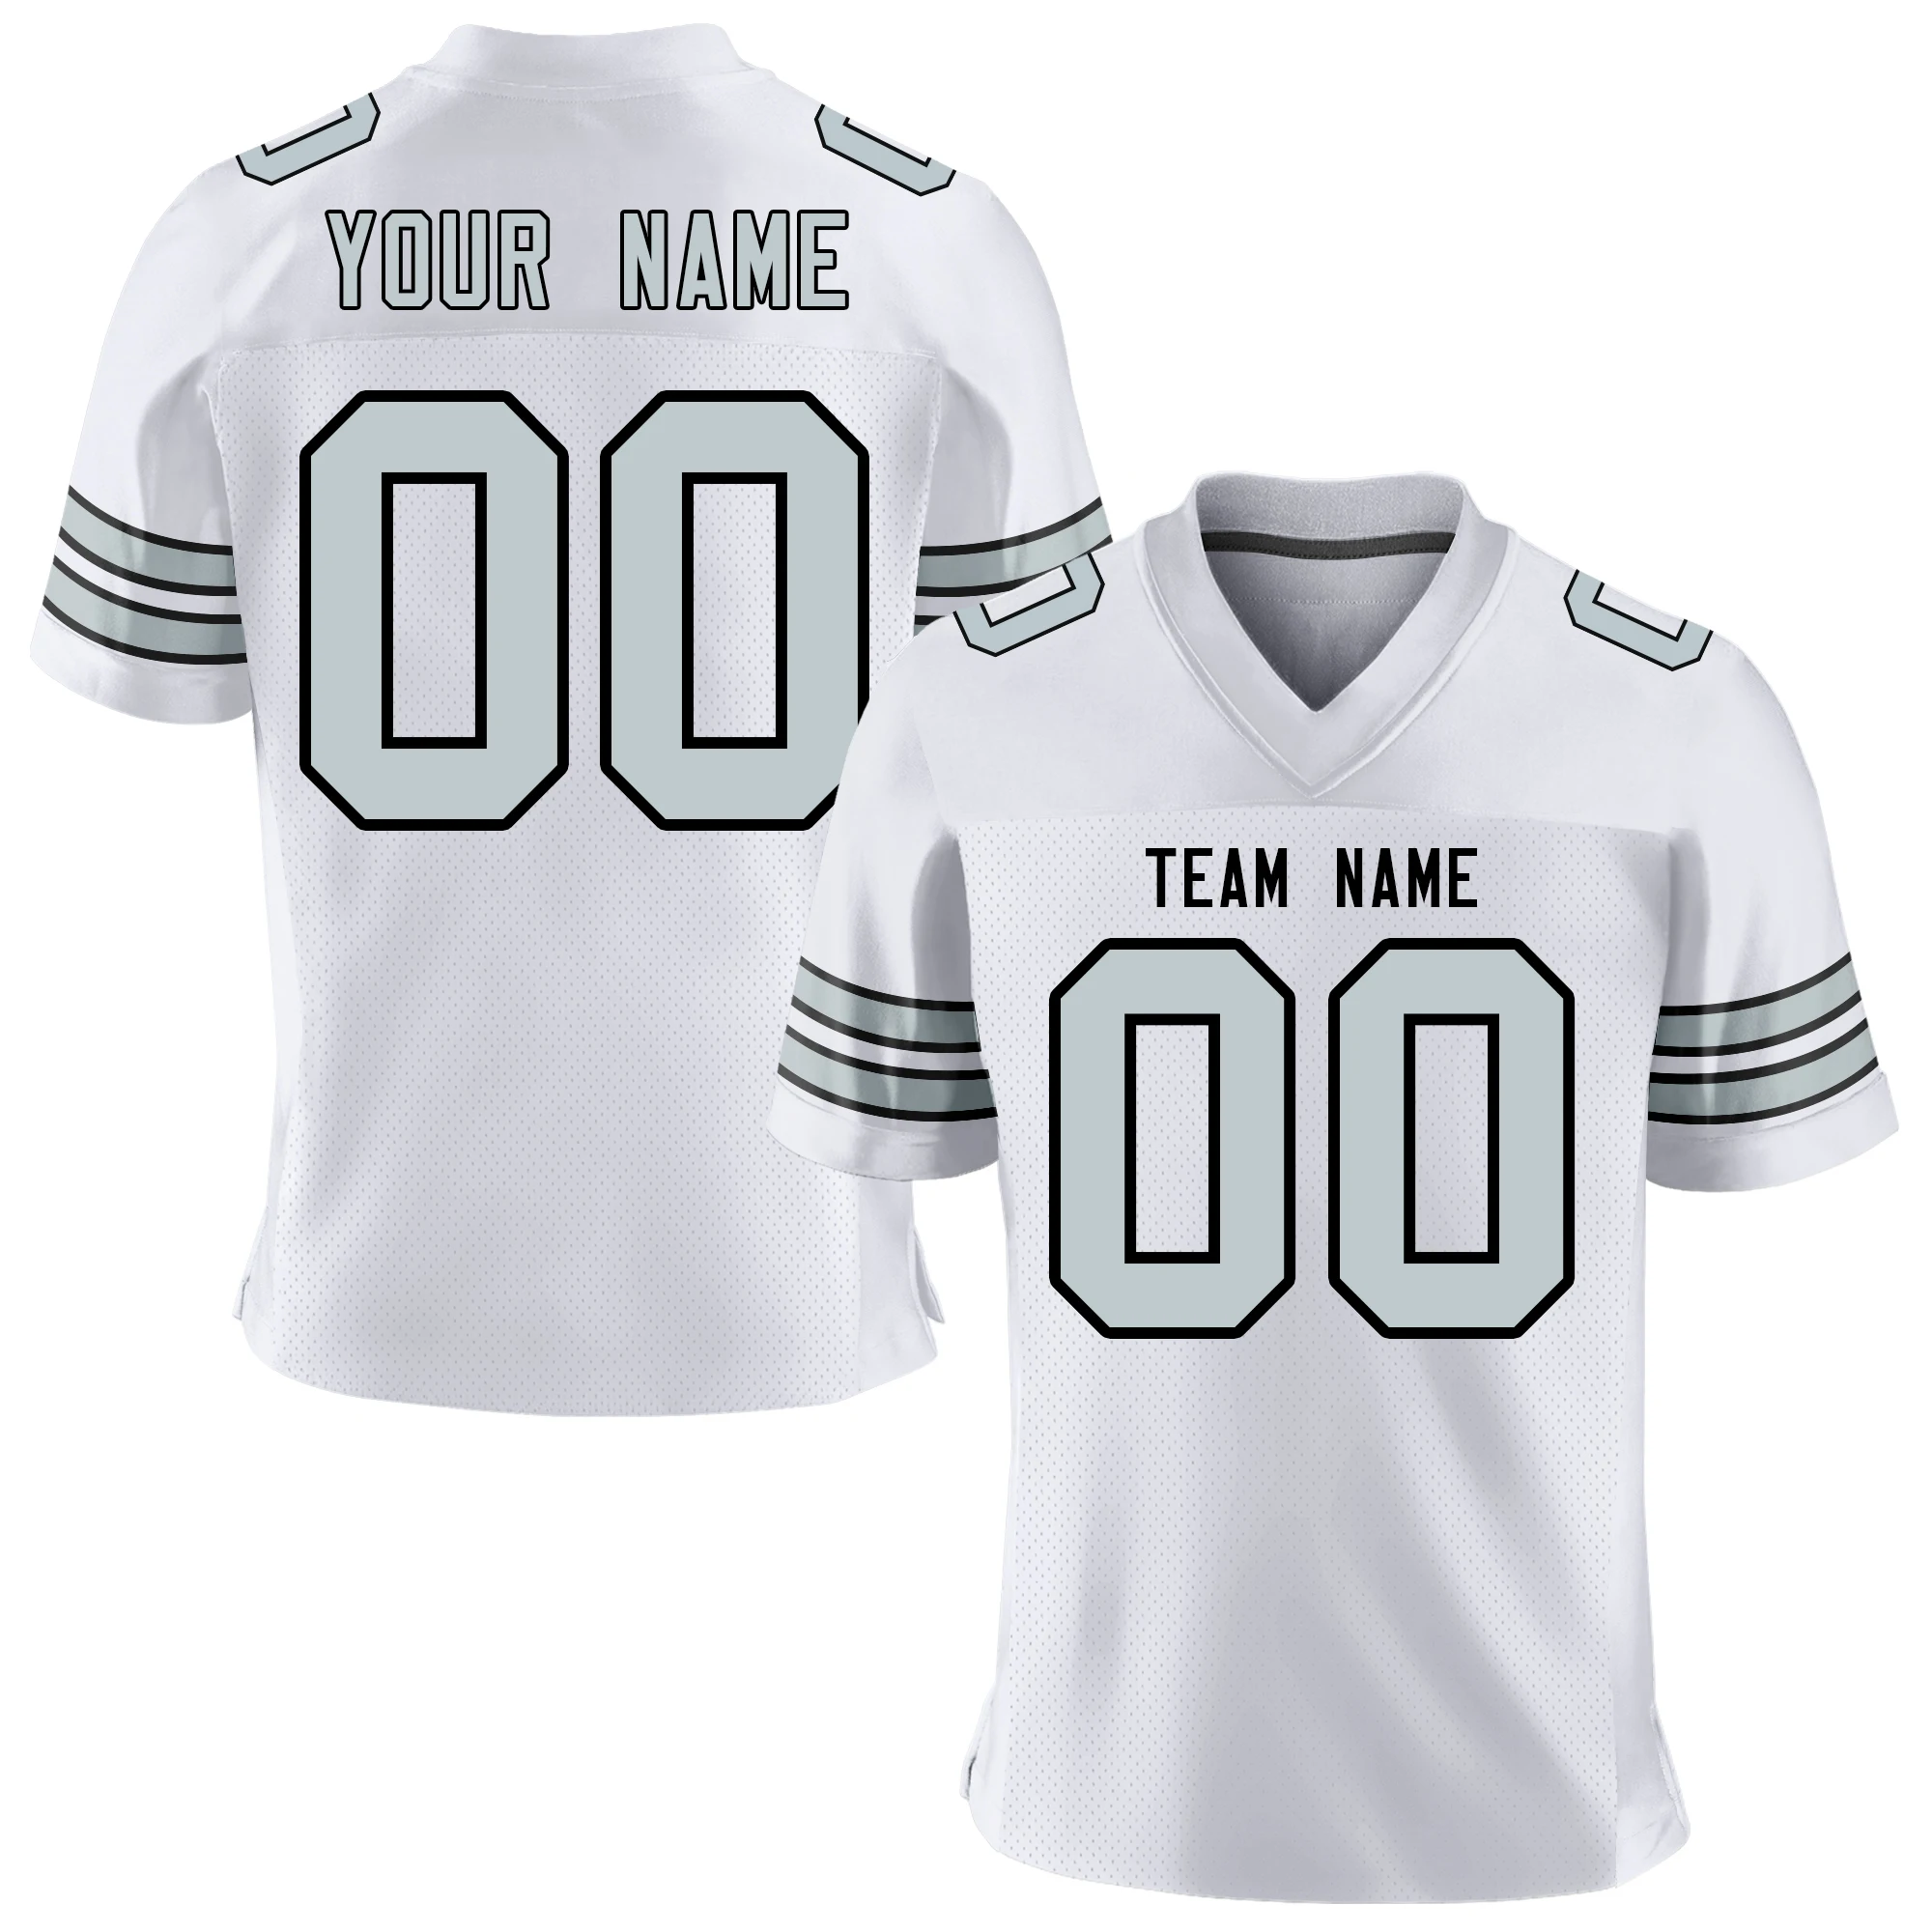 Custom American Football Jersey Design Printed Team Name Number Football  Shirt Outdoor Training Rugby Jersey Fans Gift Men/youth - Rugby Jerseys -  AliExpress